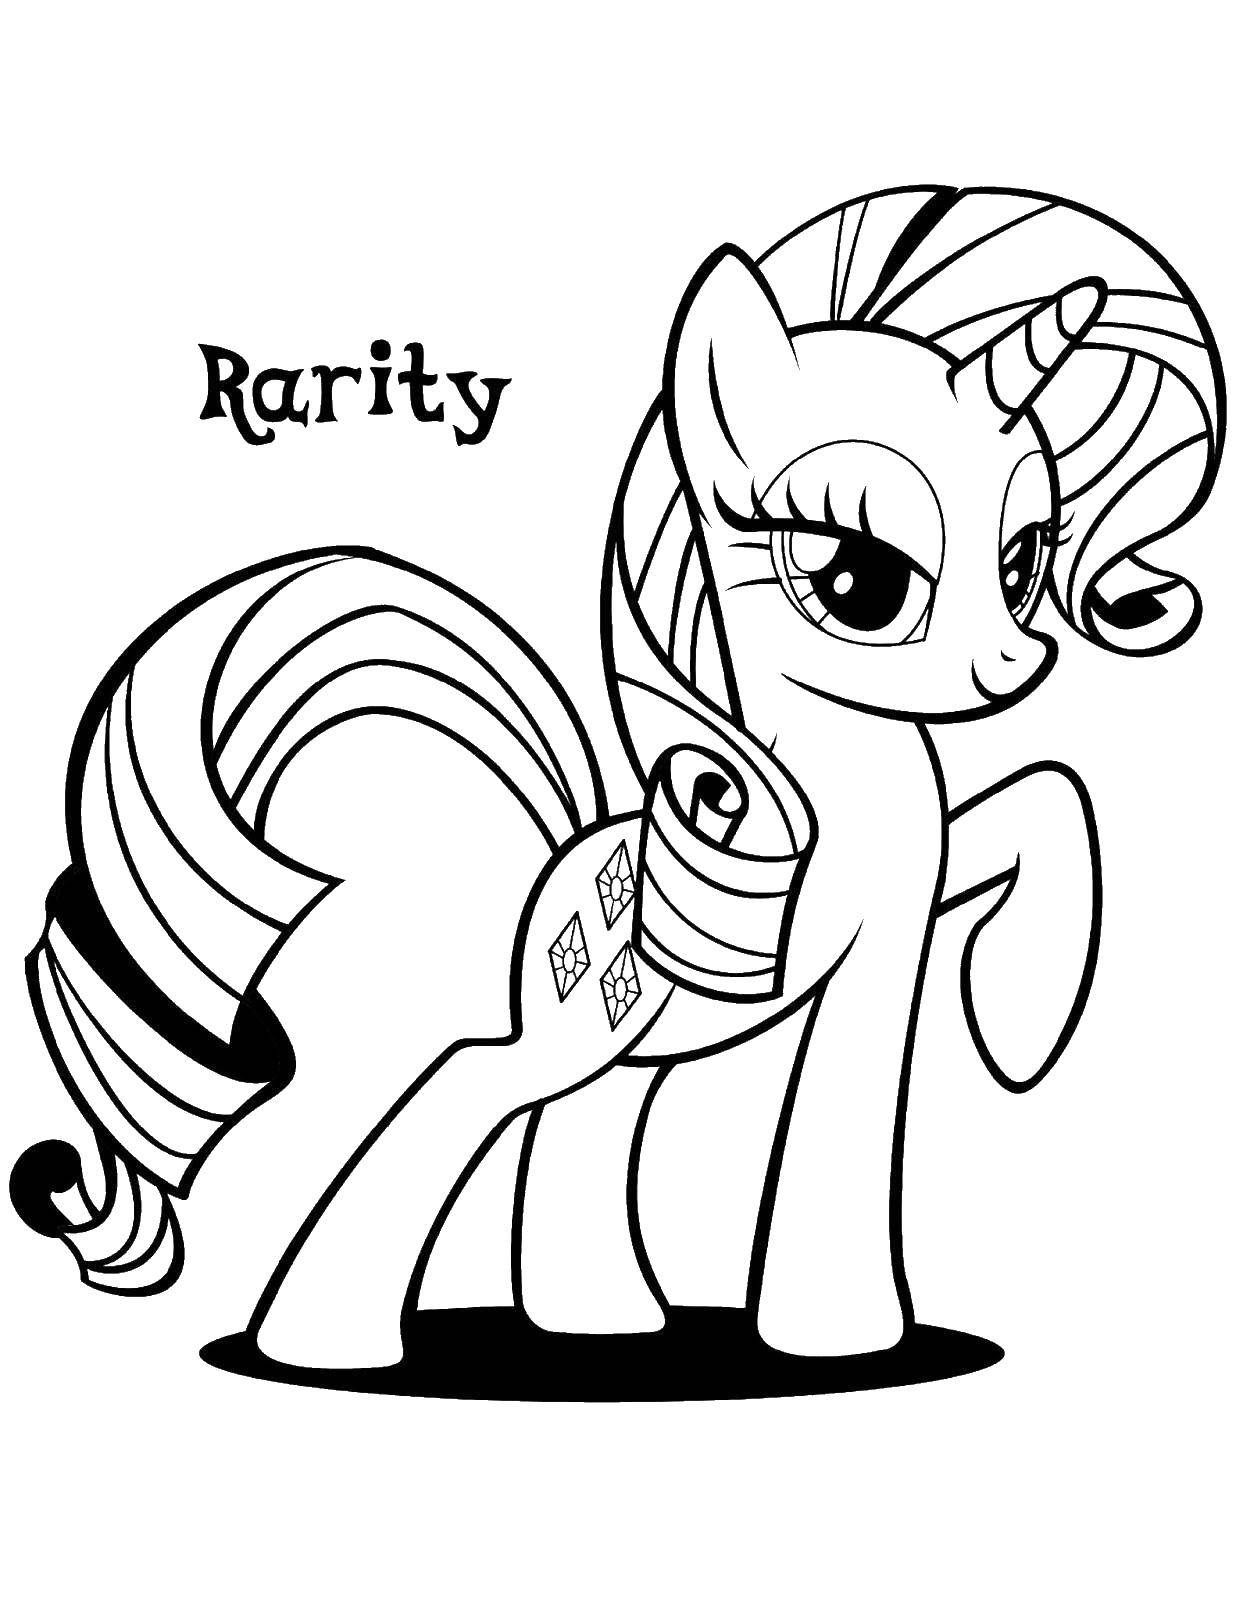 Coloring Rarity. Category my little pony. Tags:  my little pony, animation, pony, rarity.